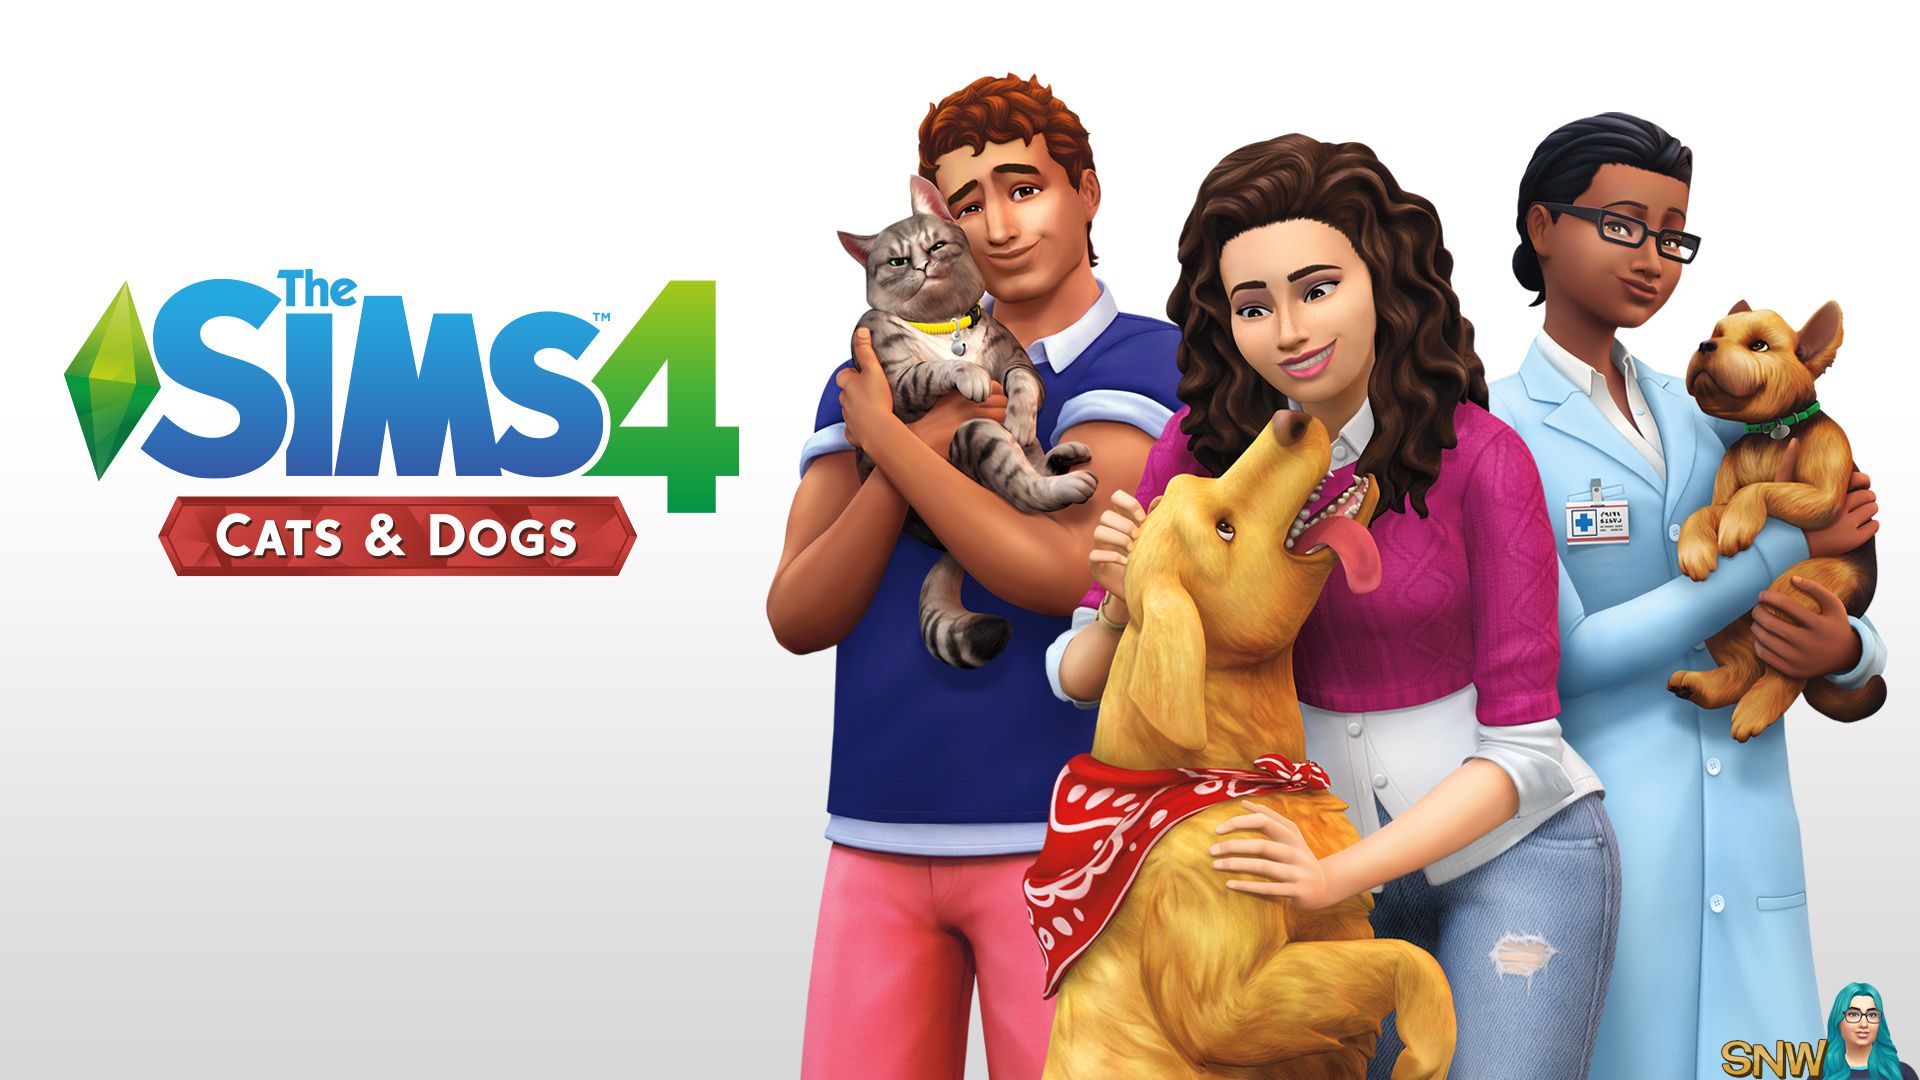 EA THE SIMS 4 EP4 CATS & DOGS PC RO_2